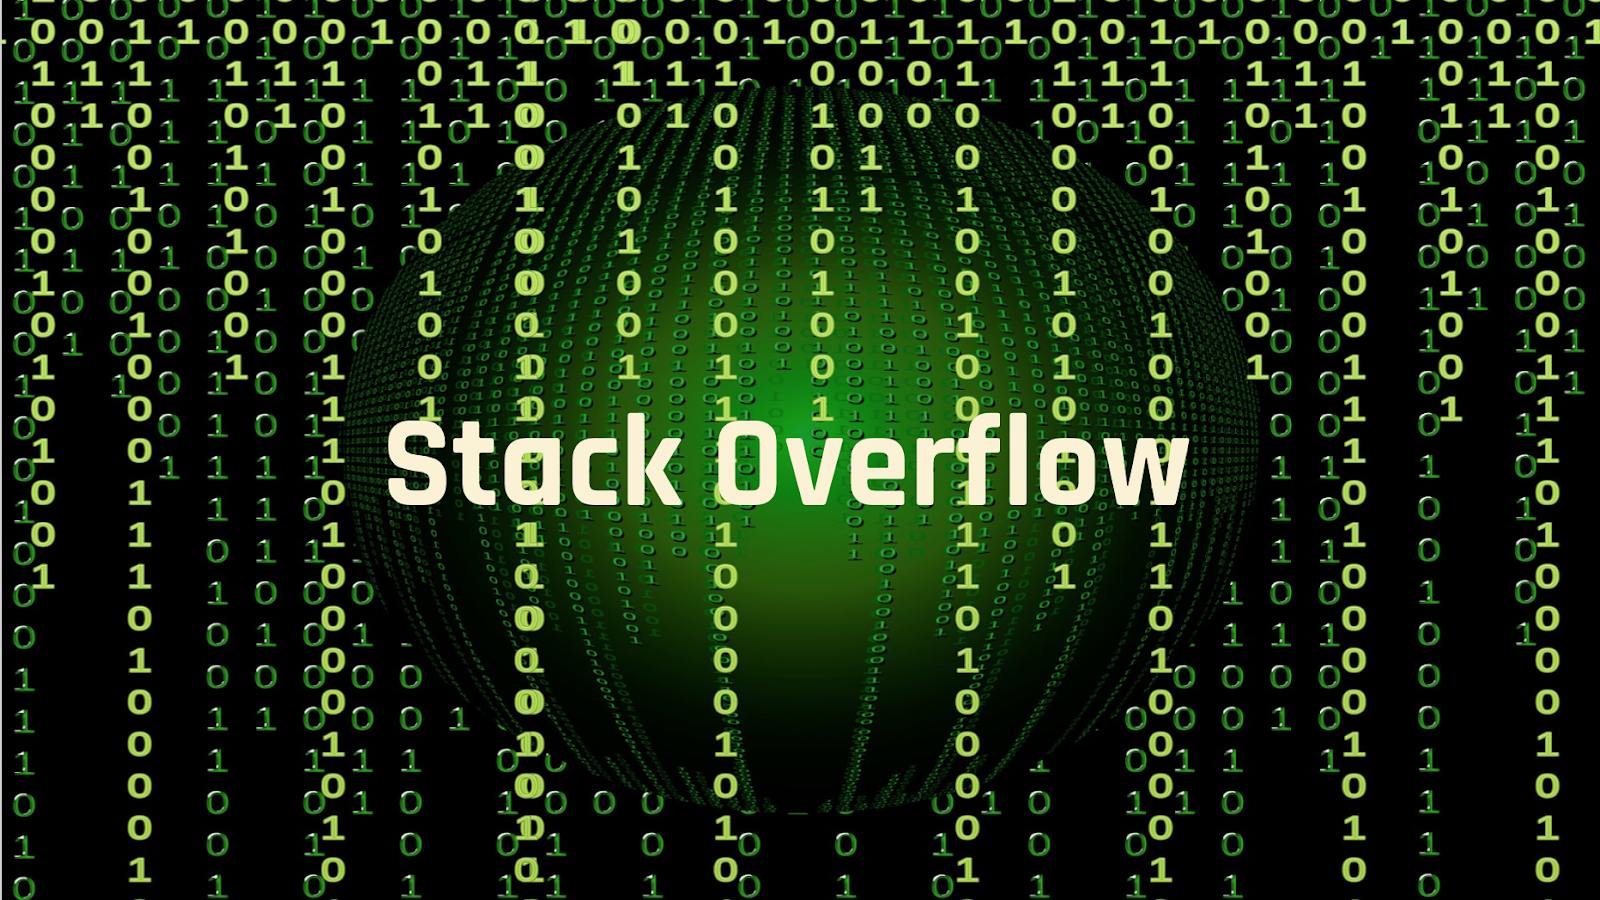 The Stack Overflow logo on a computer screen green background with ones and zeroes cascading behind it as in the Matrix. 